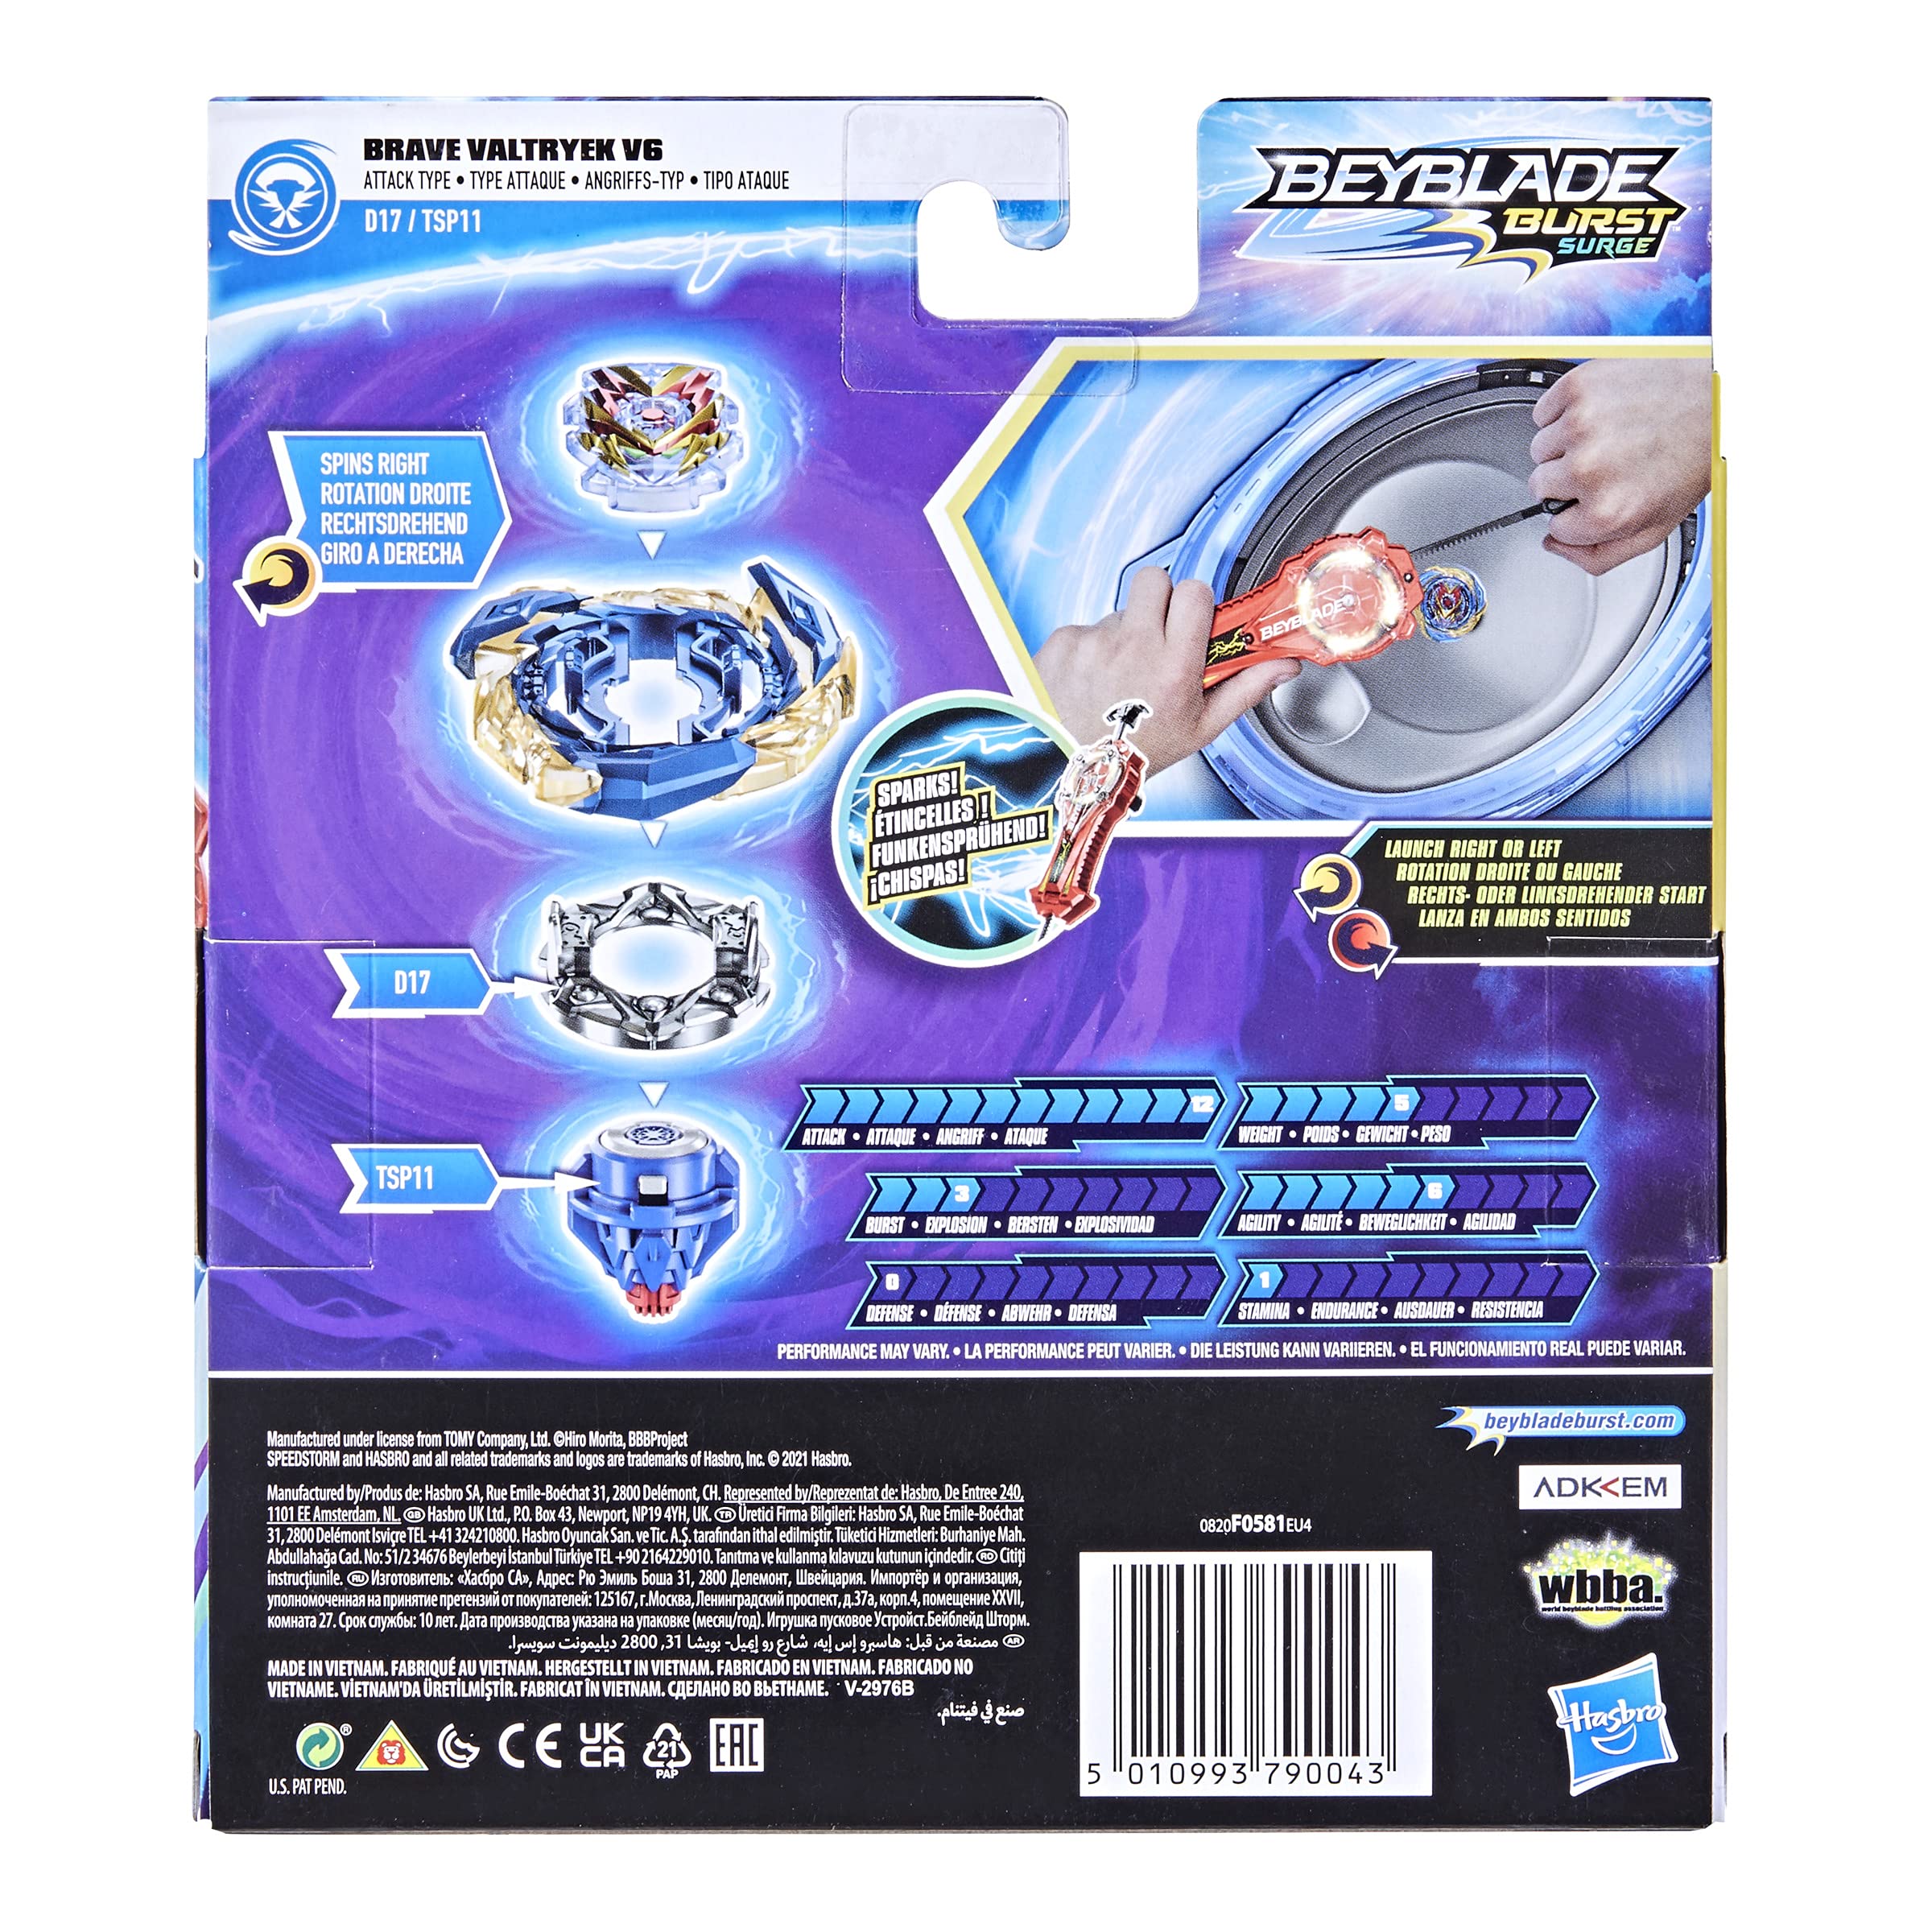 BEYBLADE Burst Surge Speedstorm Spark Power Set - Battle Game Set with Sparking Launcher and Right-Spin Battling Top Toy, Red